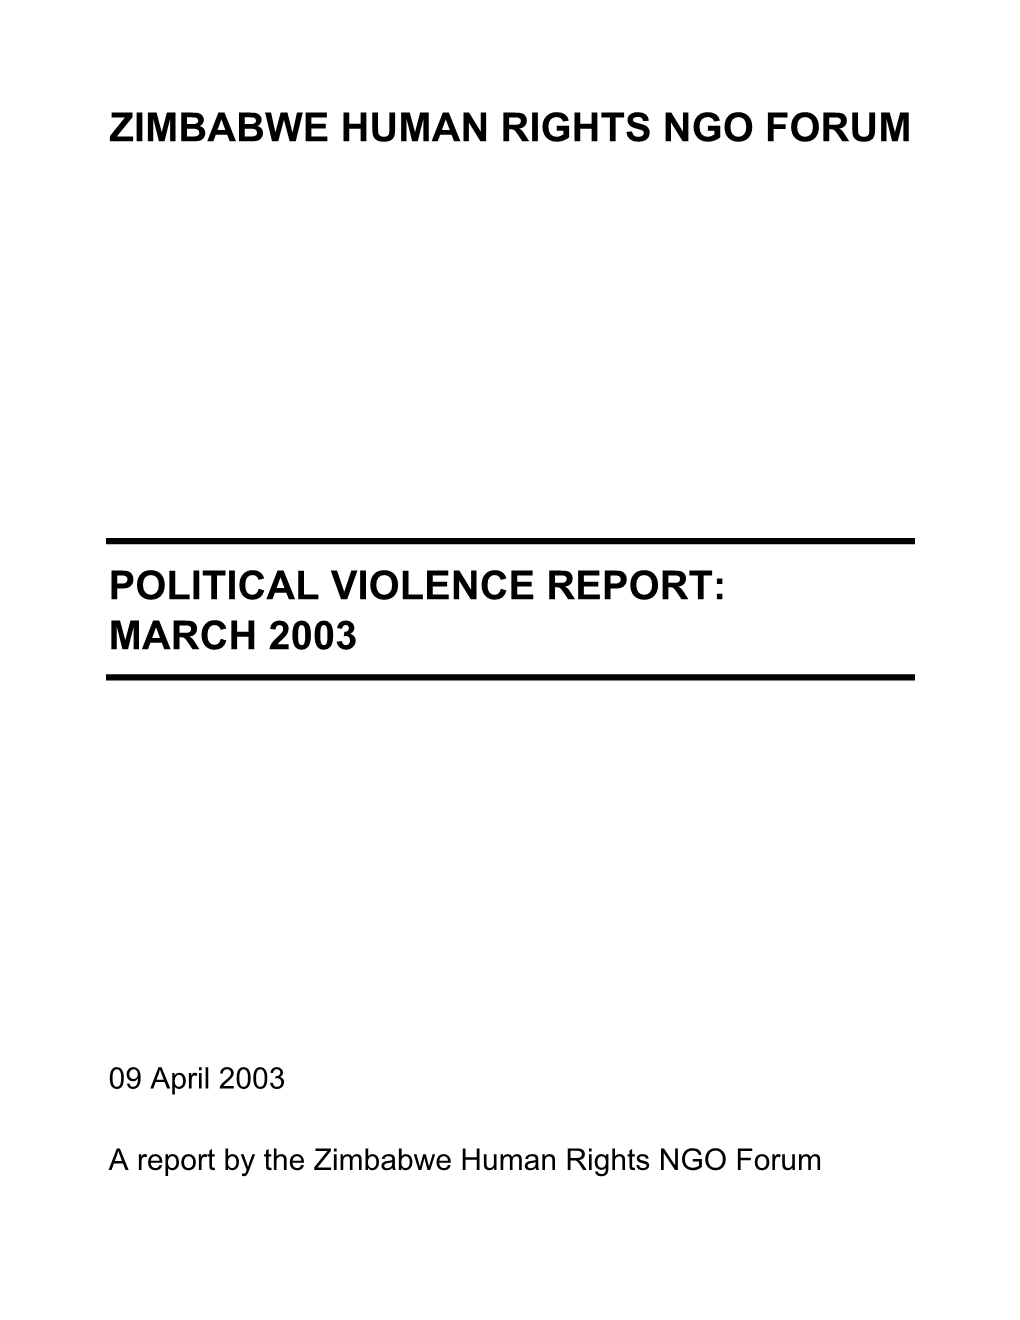 Zimbabwe Human Rights Ngo Forum Political Violence Report: March 2003